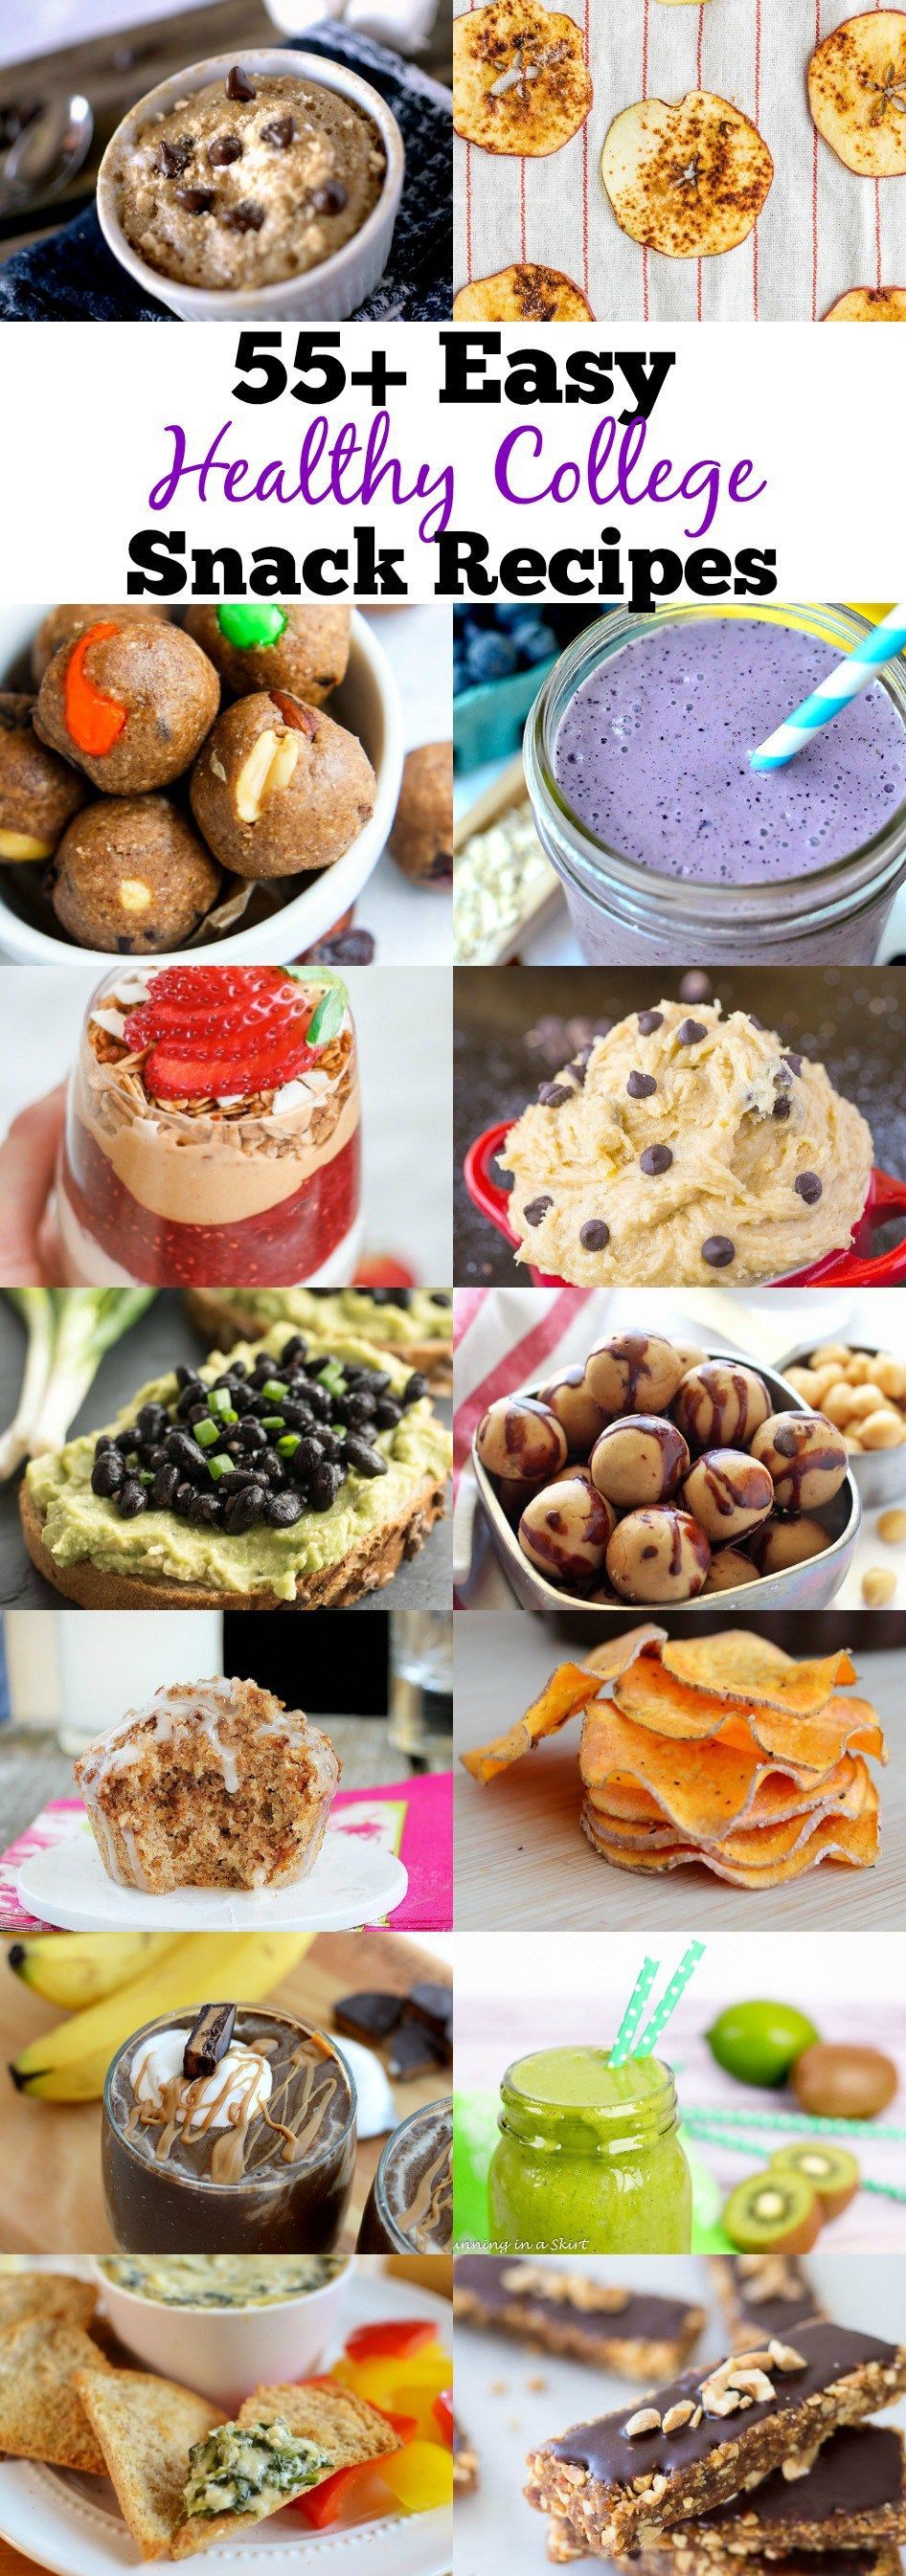 55+ Healthy College Snack Recipes That Can Be Made In a Dorm Room -   12 healthy recipes For College Students people ideas